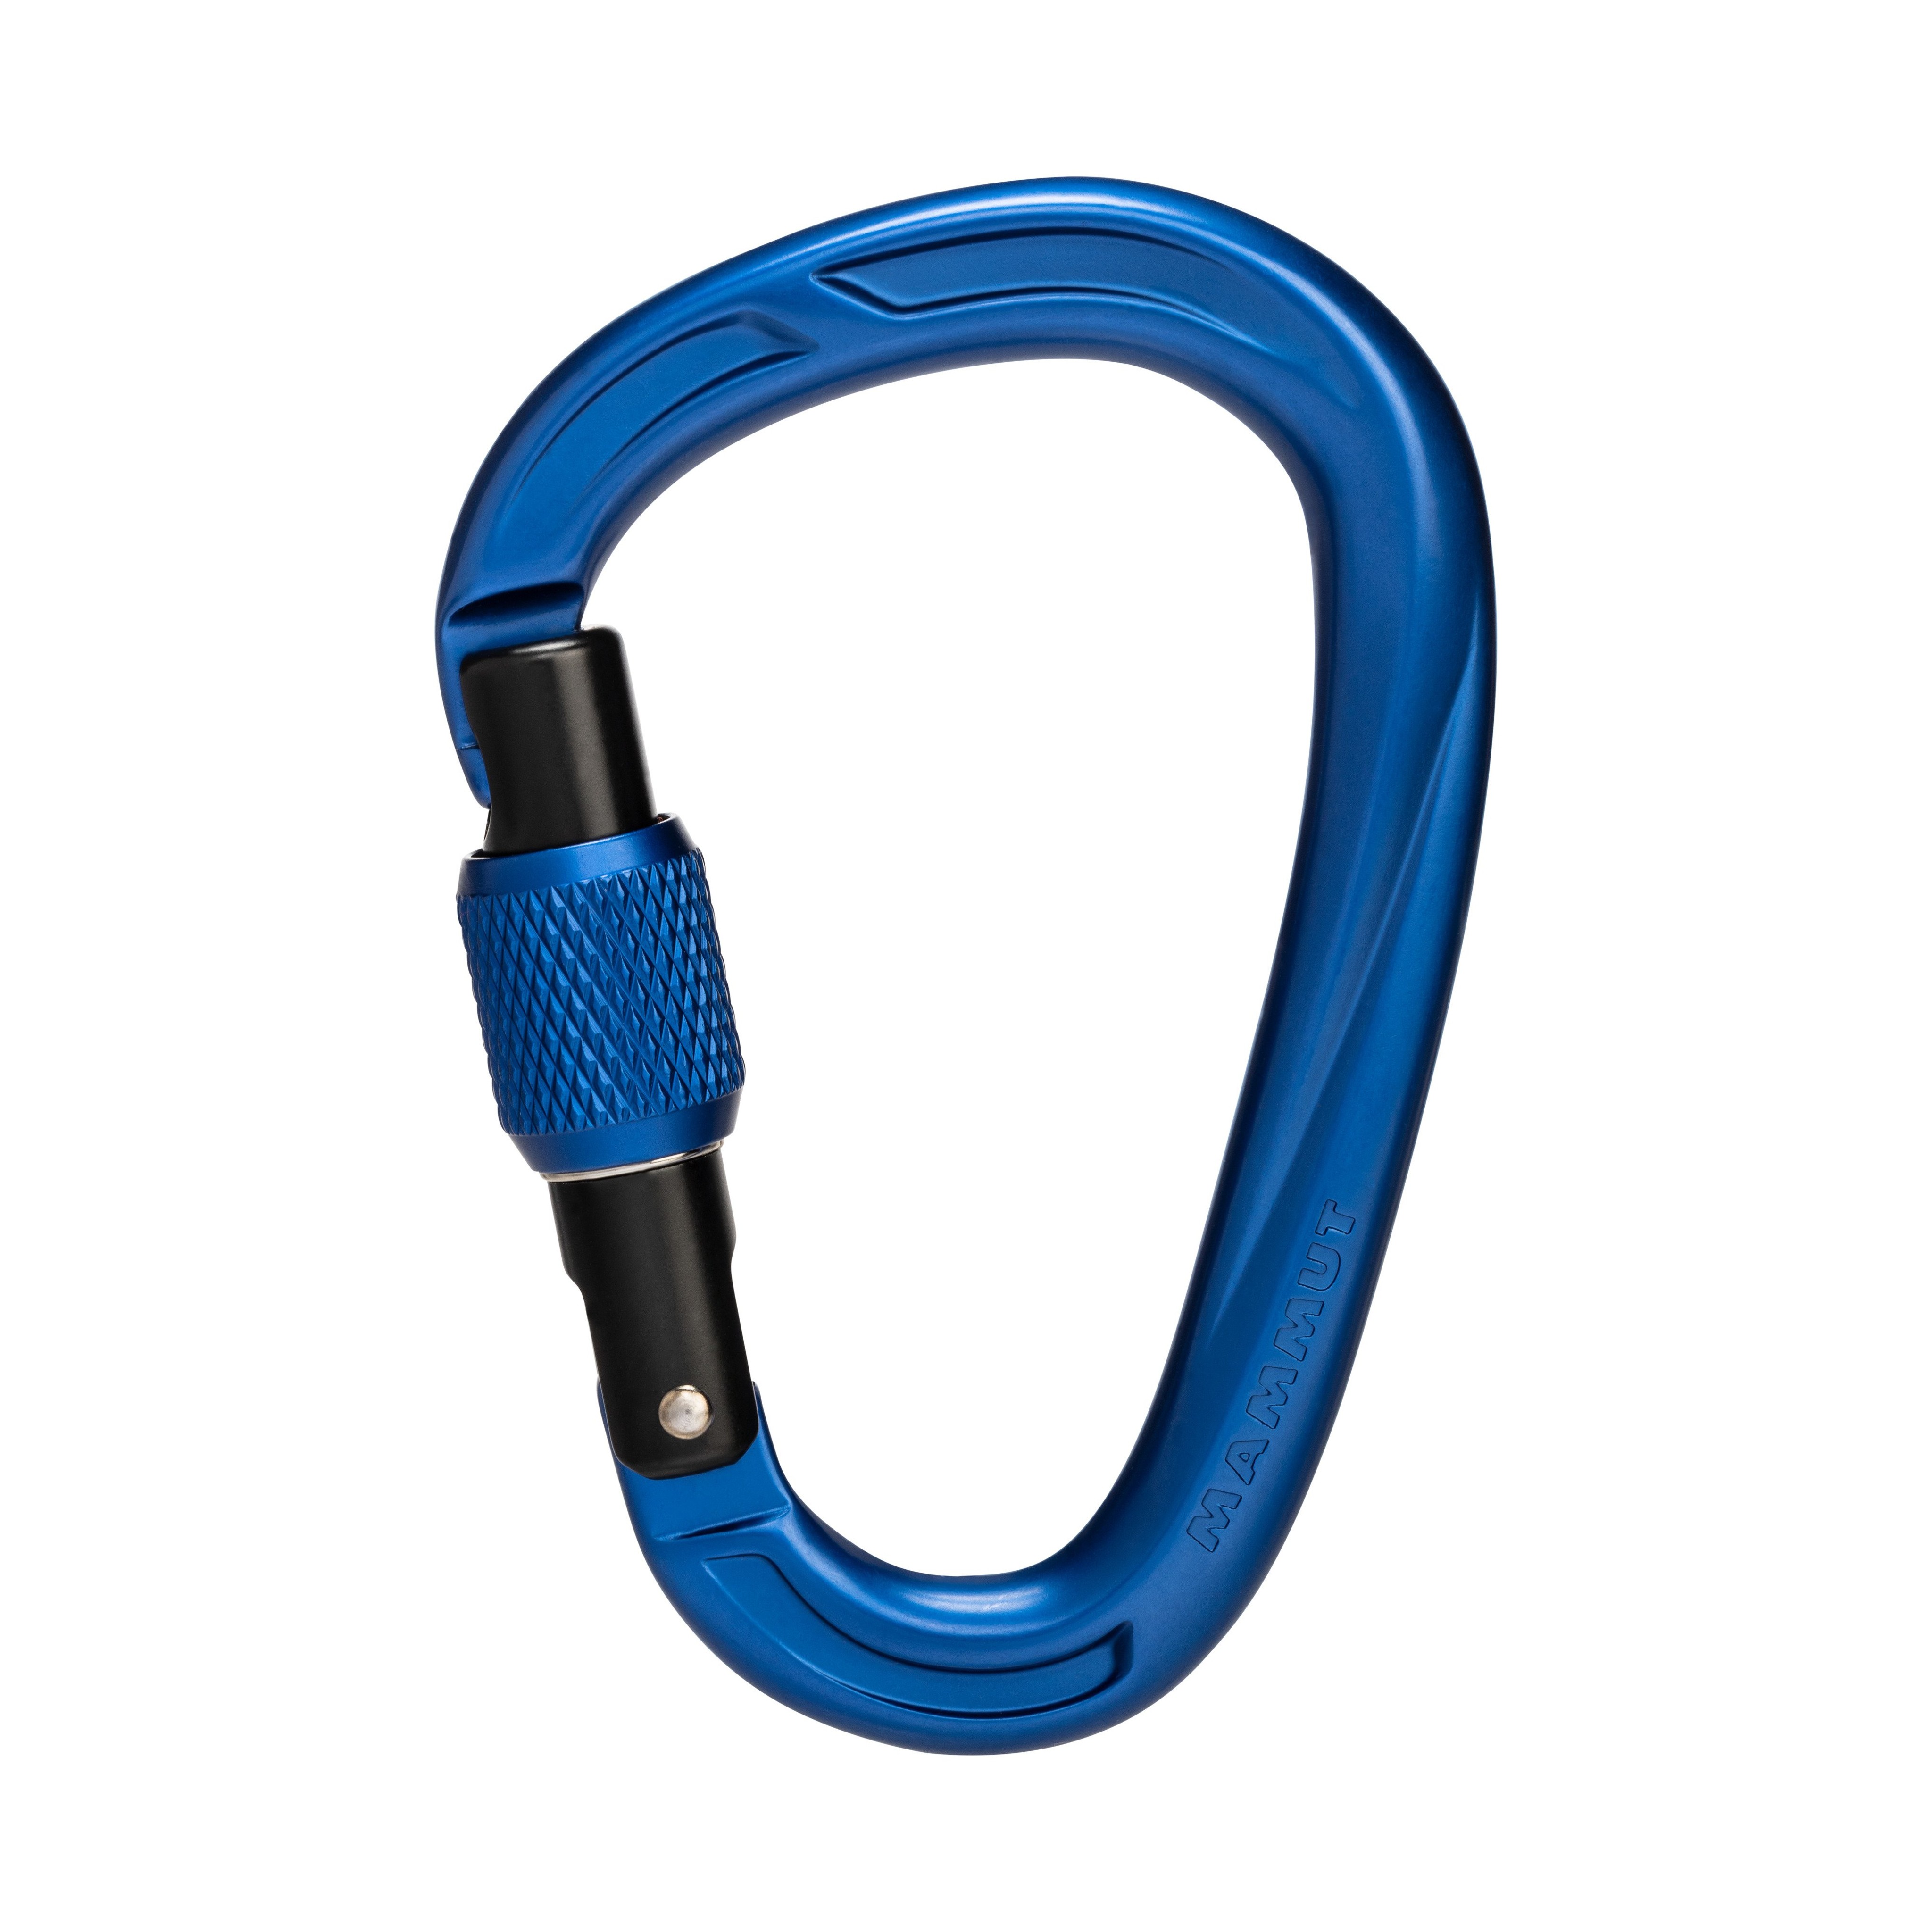 Crag HMS Screwgate Carabiner - one size product image